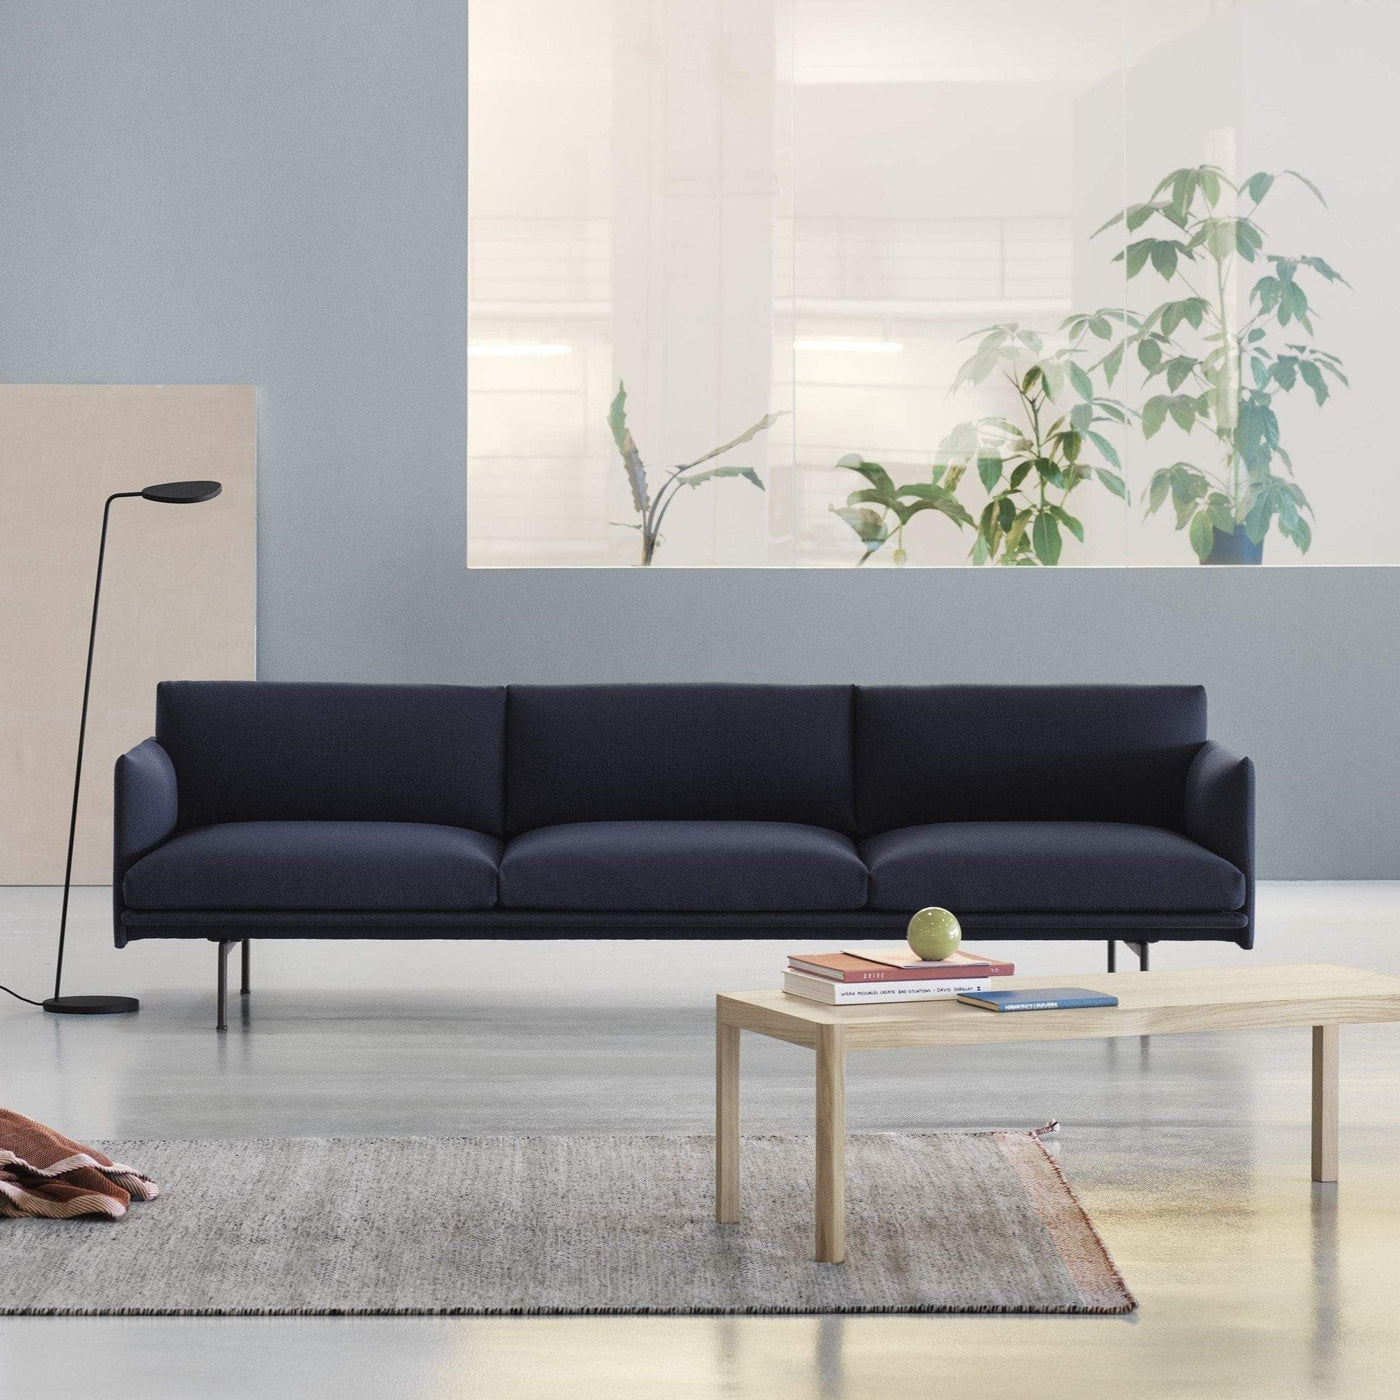 Muuto Outline 3.5 seater sofa in Vidar 554 blue fabric. Made to order from someday designs. #colour_vidar-554